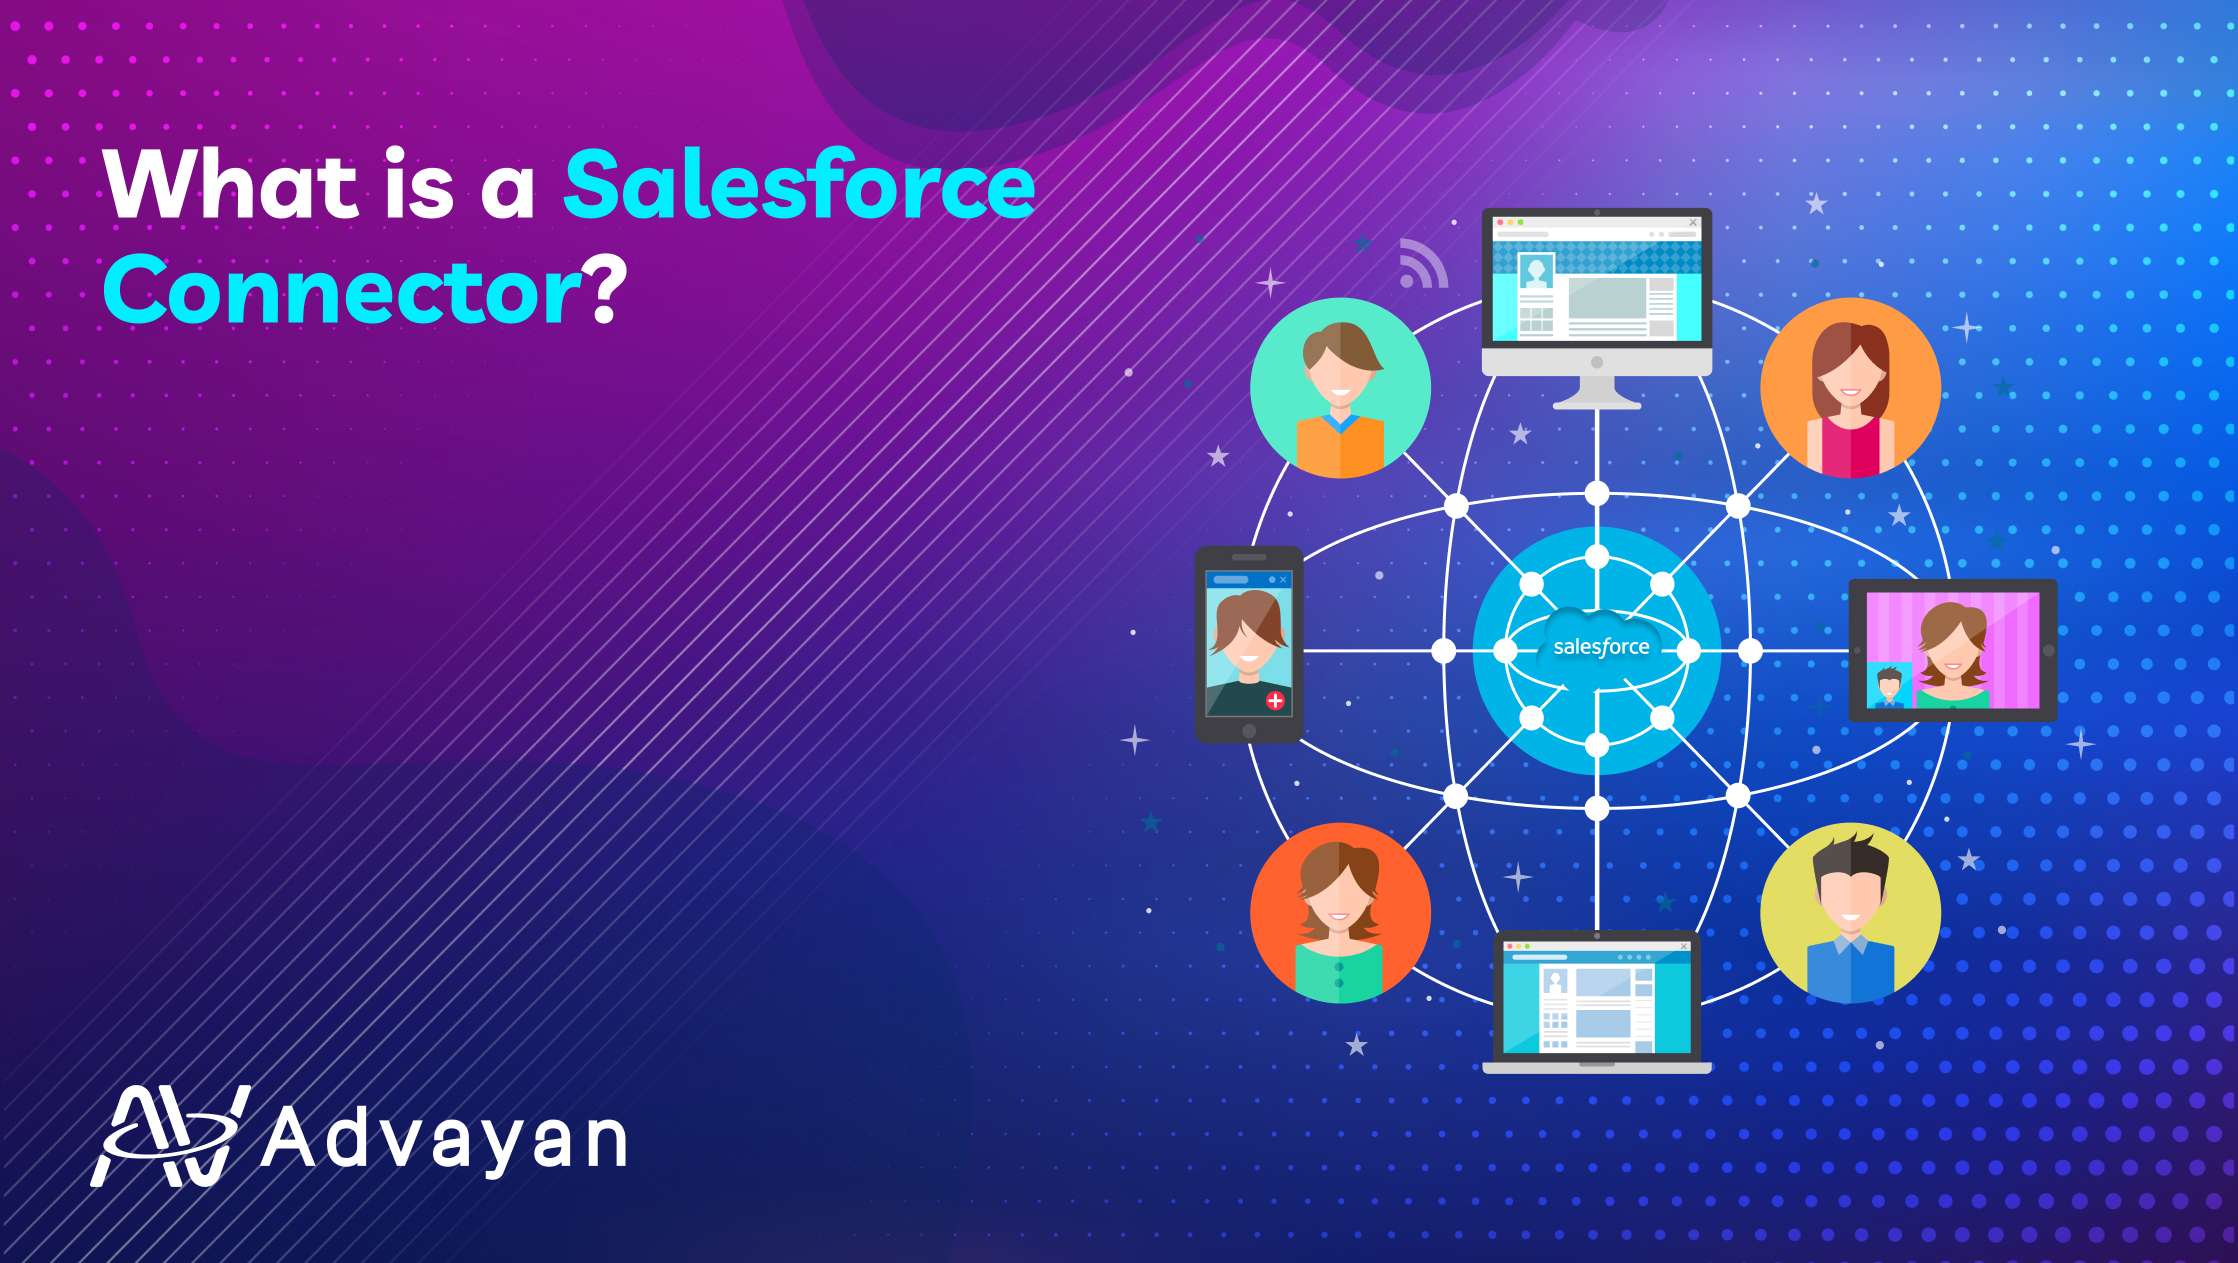 What is a Salesforce connector